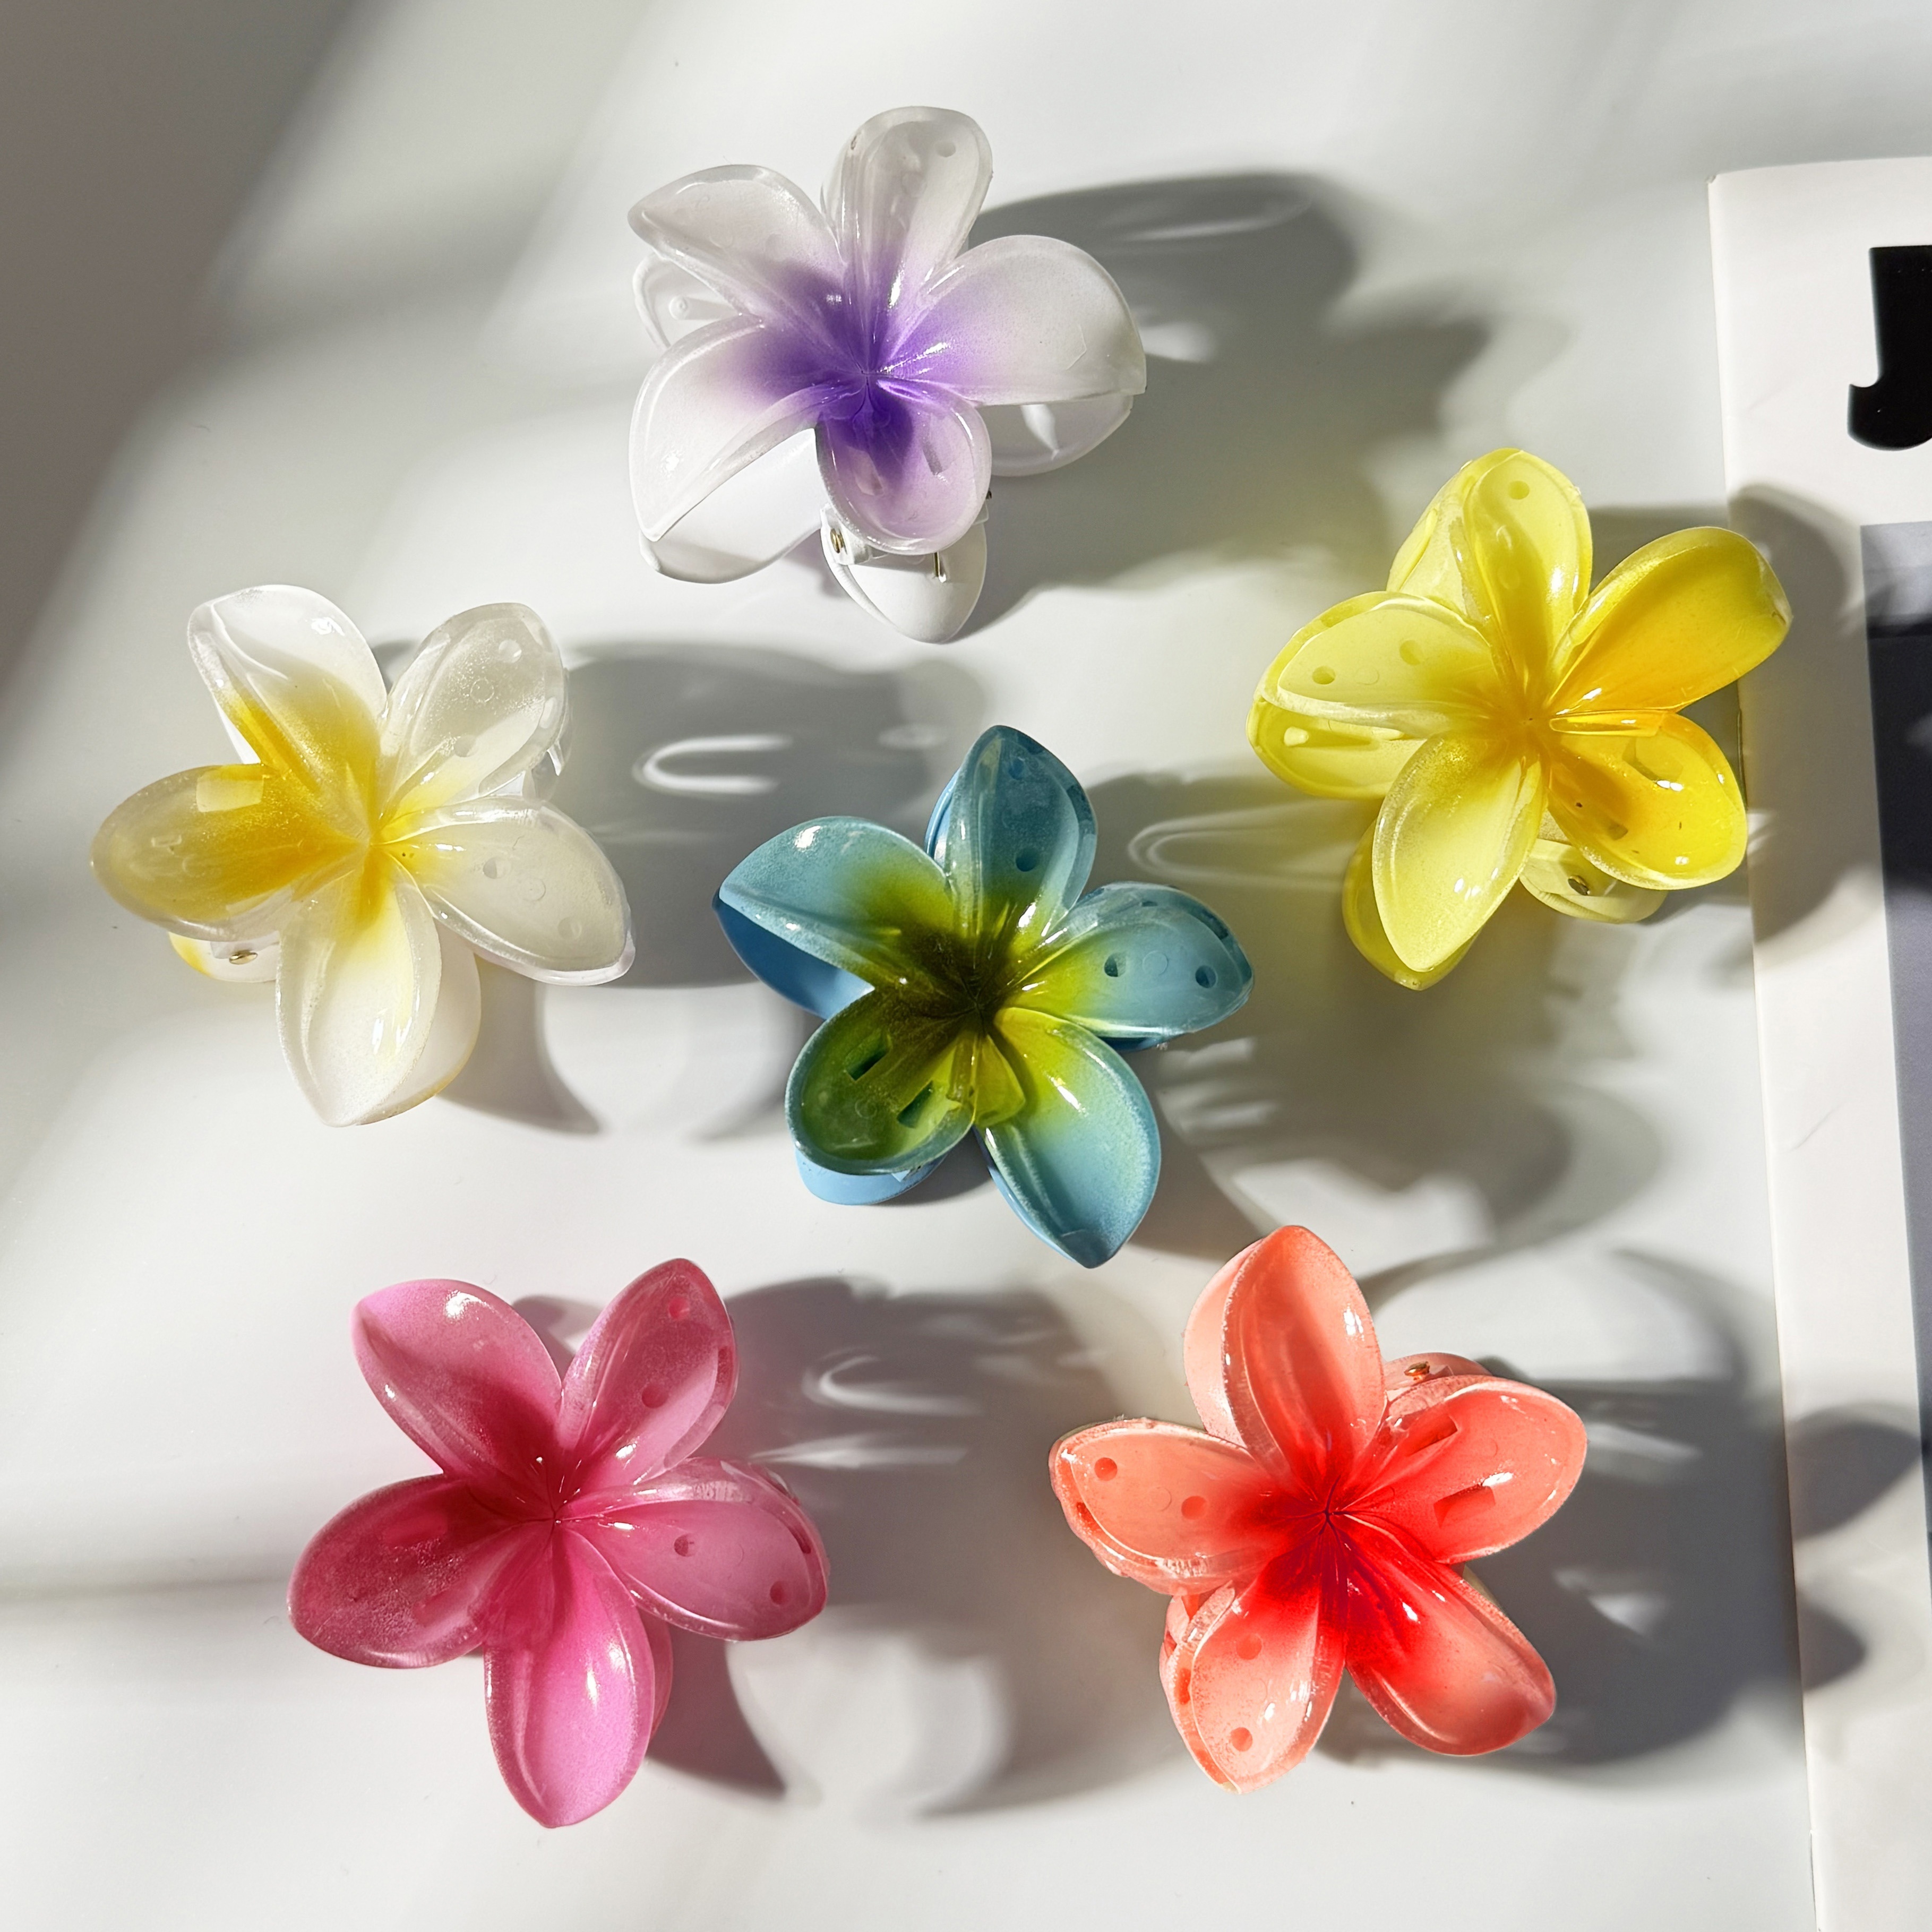 

6-piece Set Colorful Floral Hair Claw Clips - Sweet & Simple Acrylic Flower Design For Women, Perfect For Birthdays & Everyday Chic